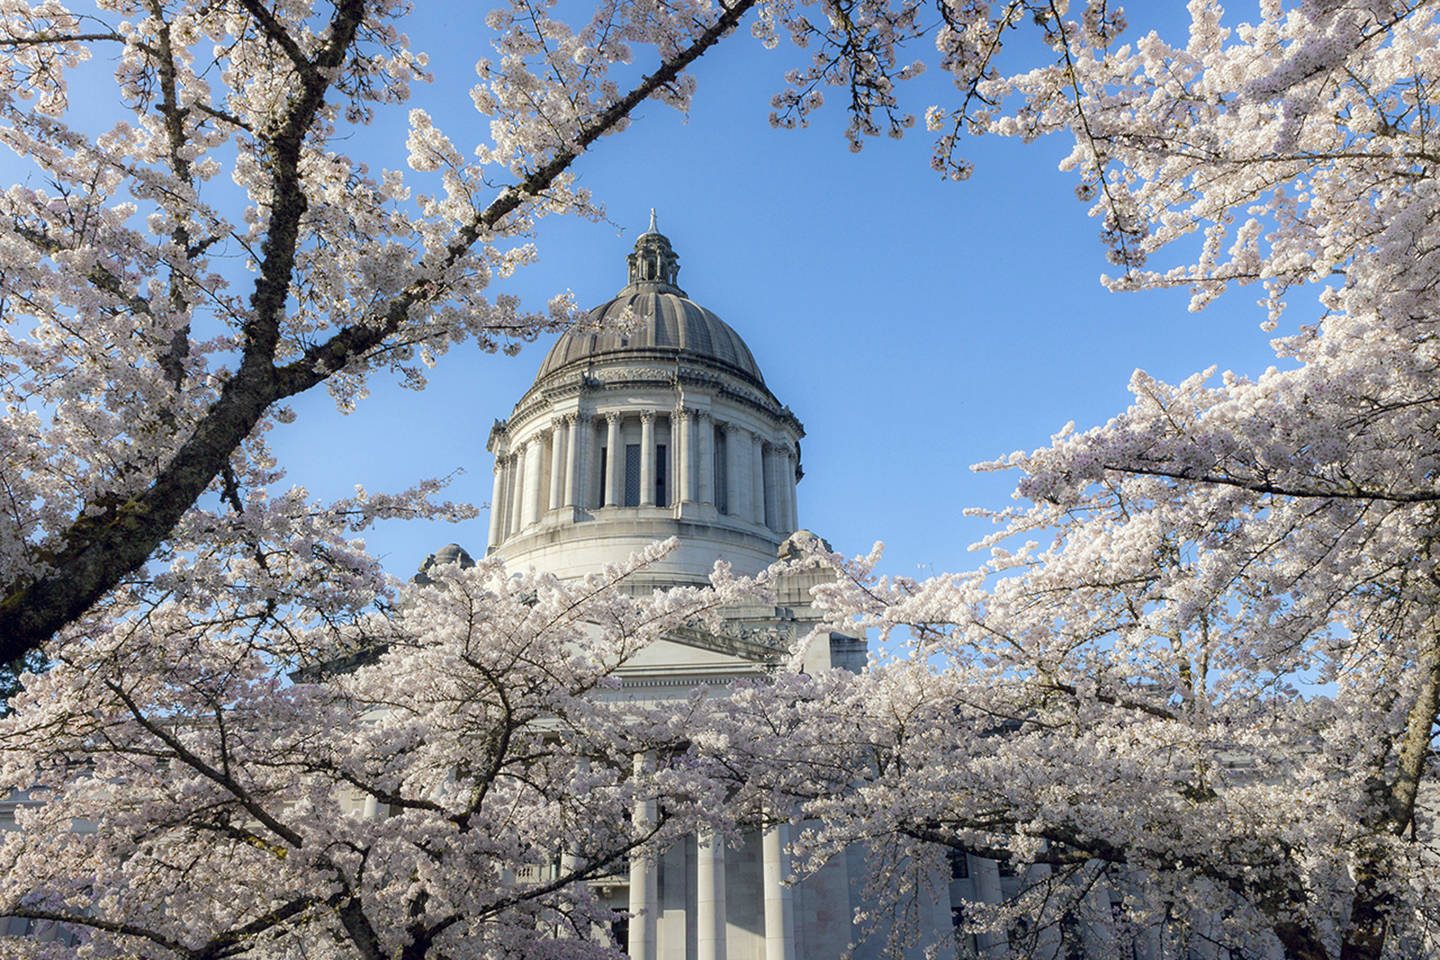 (Linda J. Smith) Cherry trees fully in bloom at the state capital in Olympia.